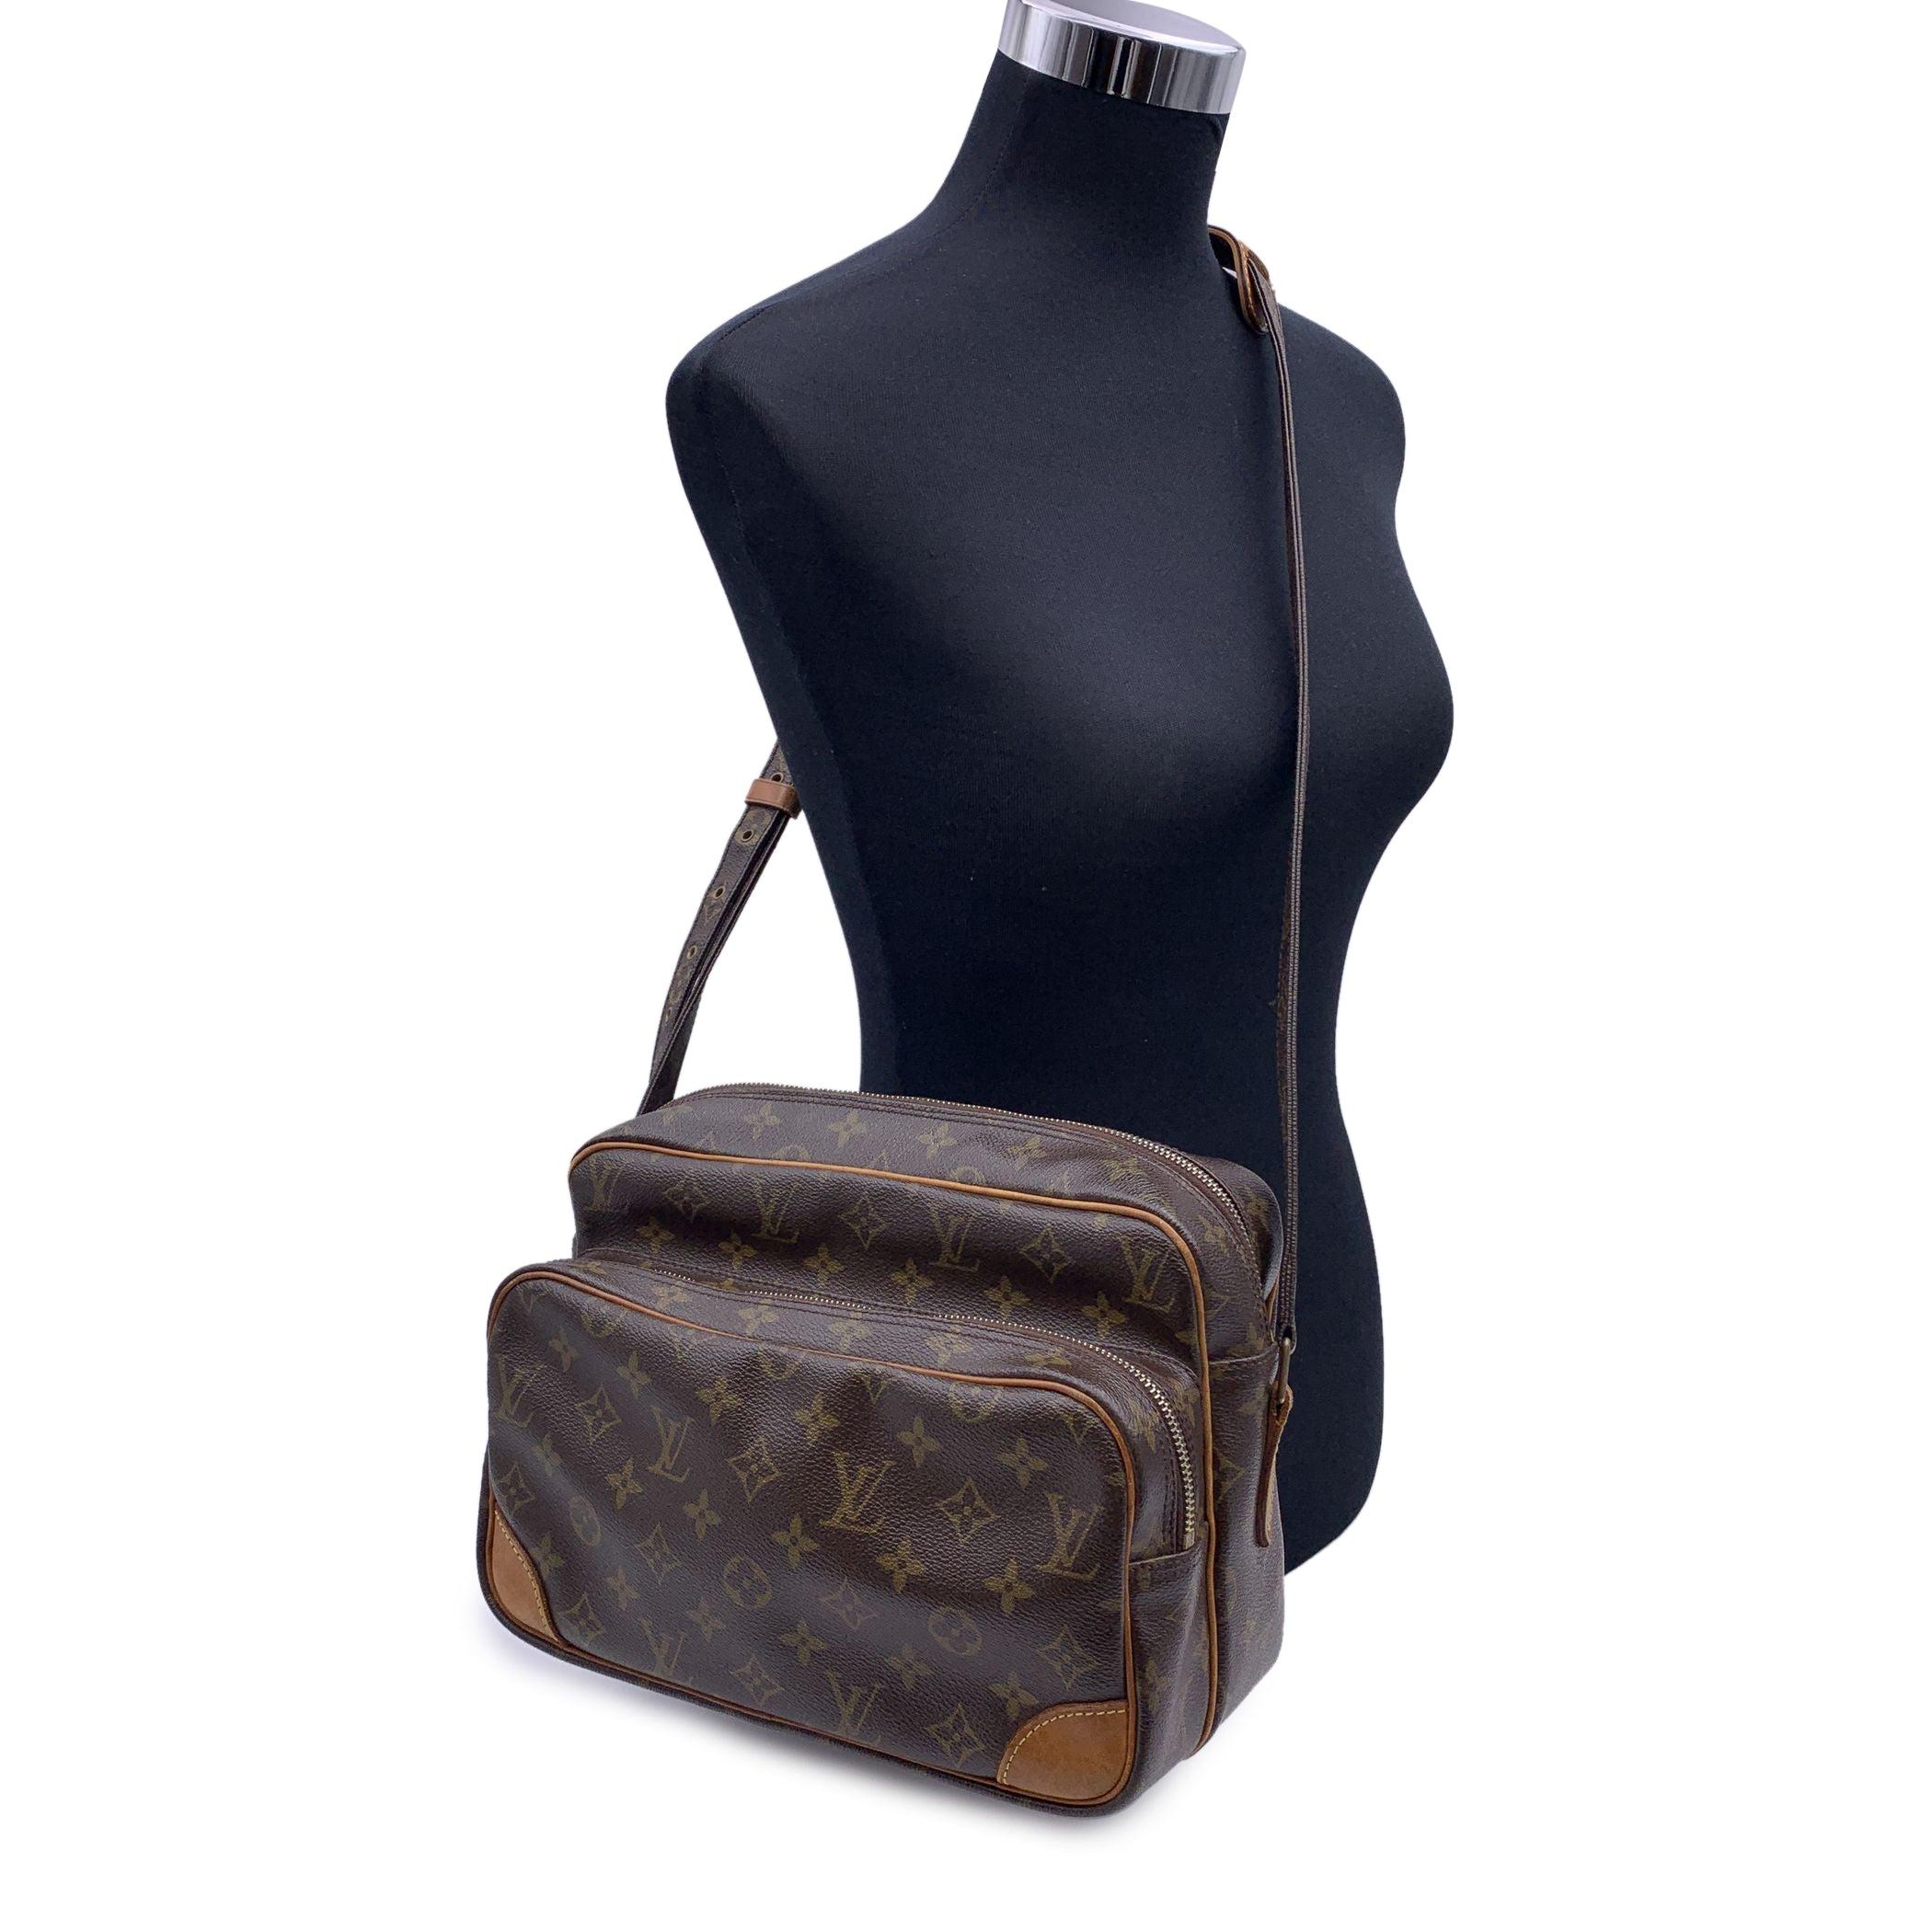 LOUIS VUITTON 'Nil' crafted in timeless monogram canvas with vacchetta leather trim. It features 1 zip pocket on the front, golden brass hardware and adjustable canvas shoulder strap. Zip closure on top. Inside it is lined with leather and 1 side